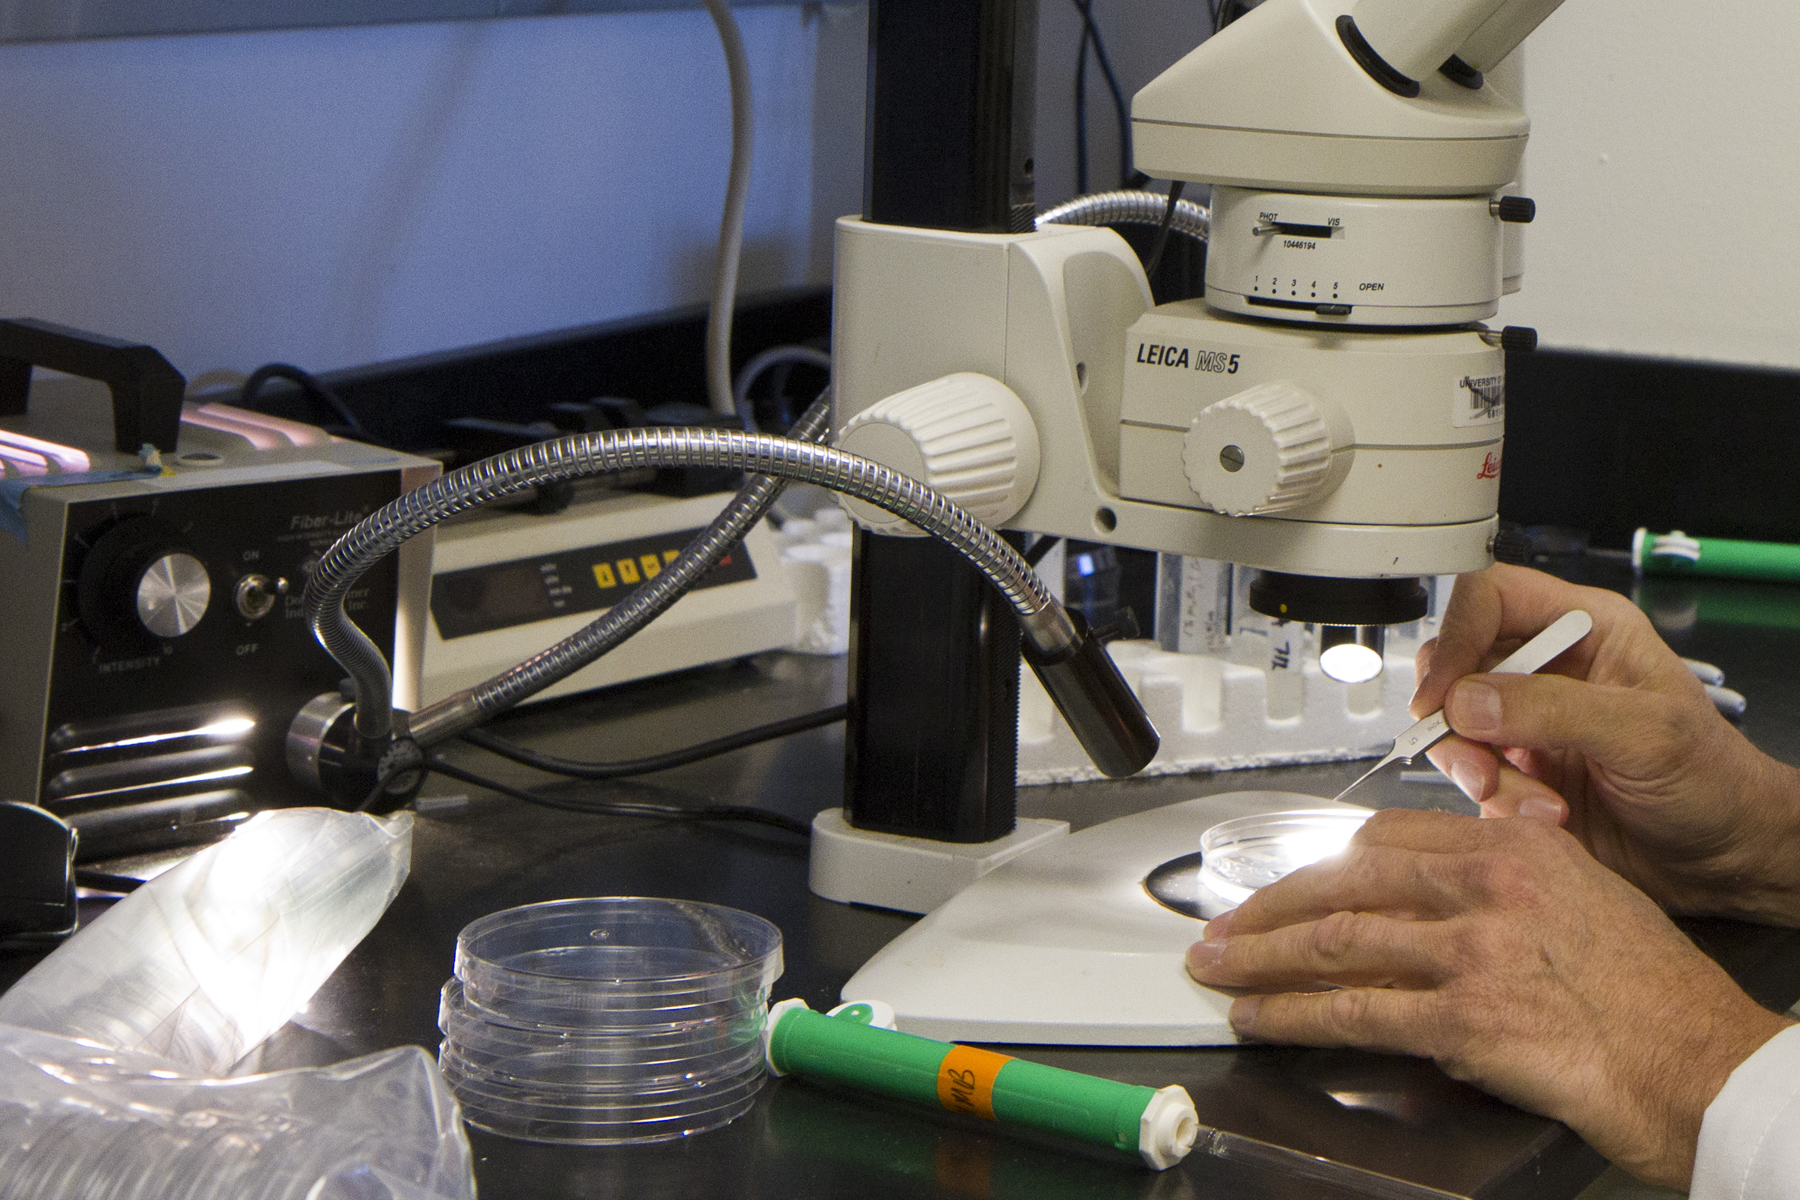 Person using a tool to move items in a petri dish under a microscope